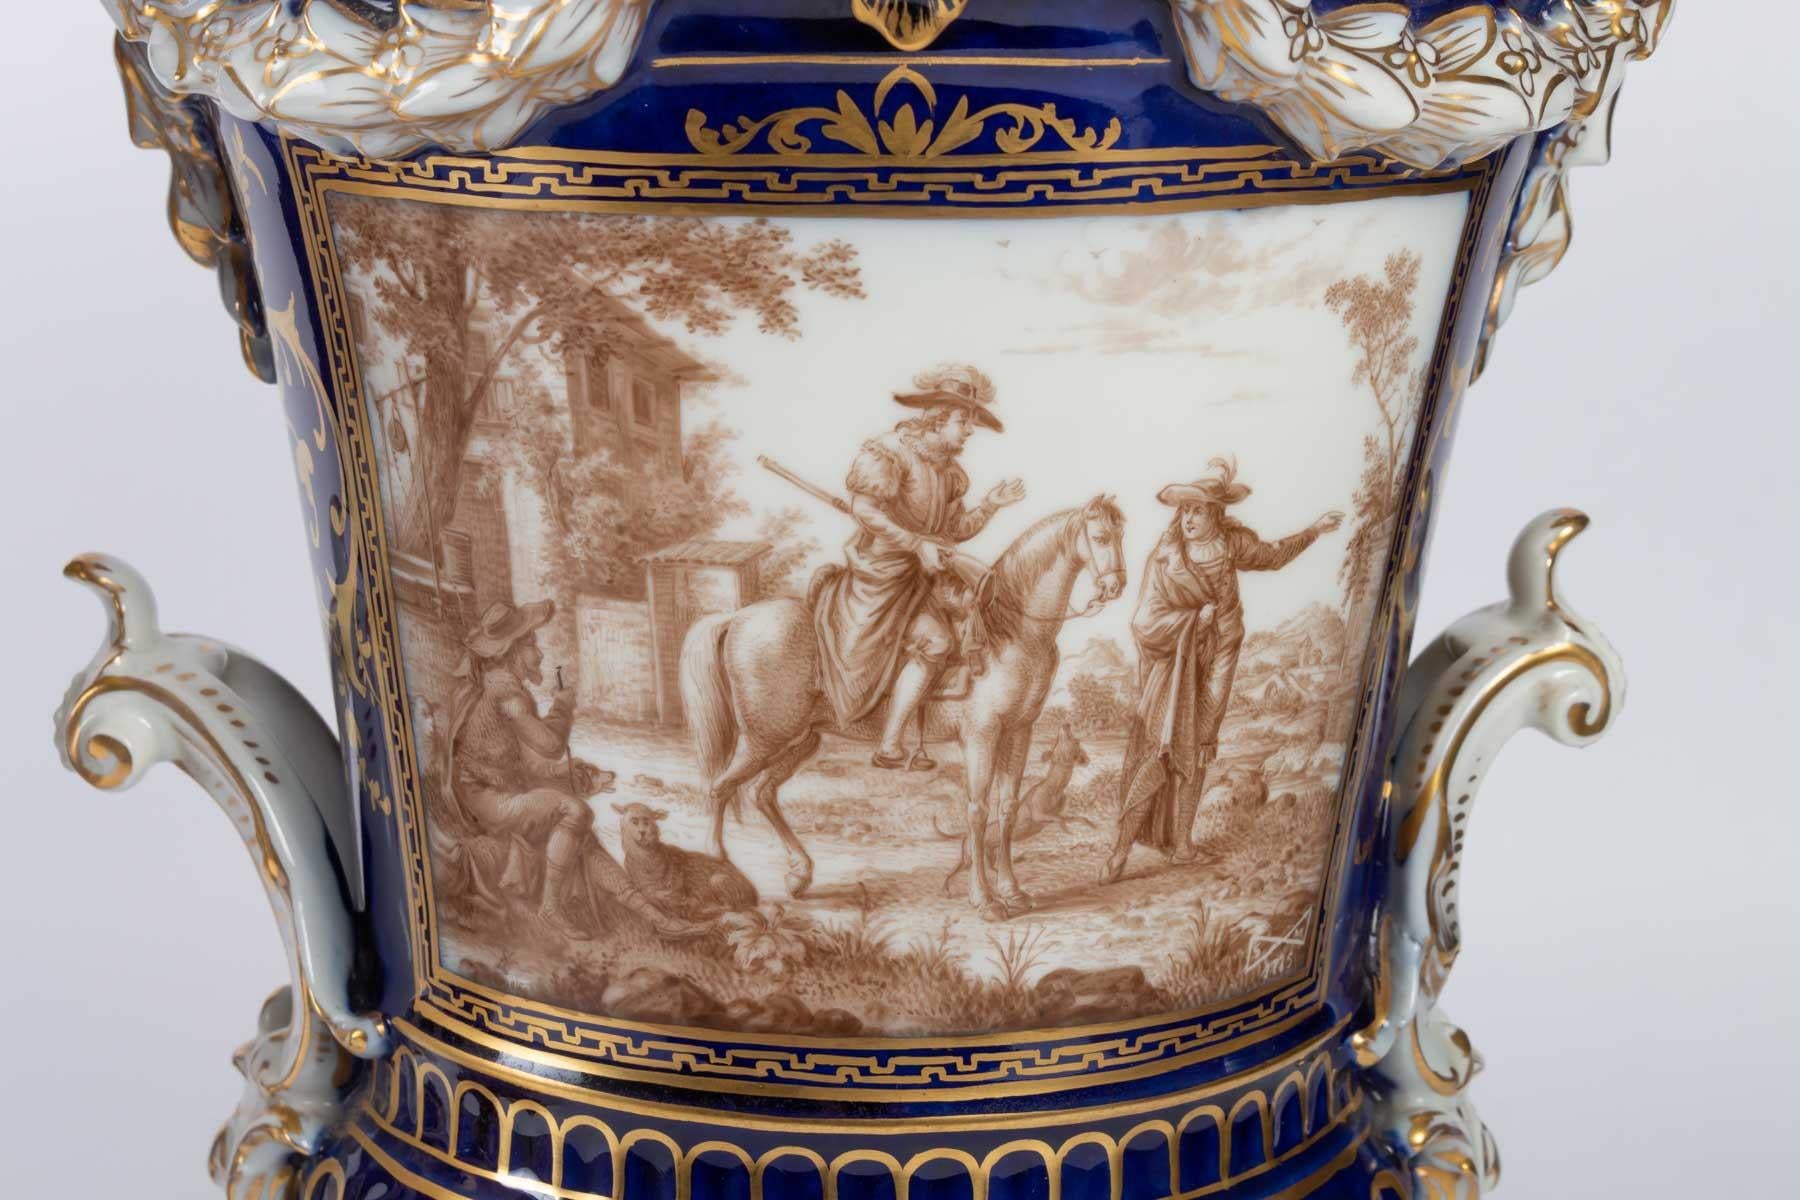 Napoleon III Pair of Covered Porcelain Vases